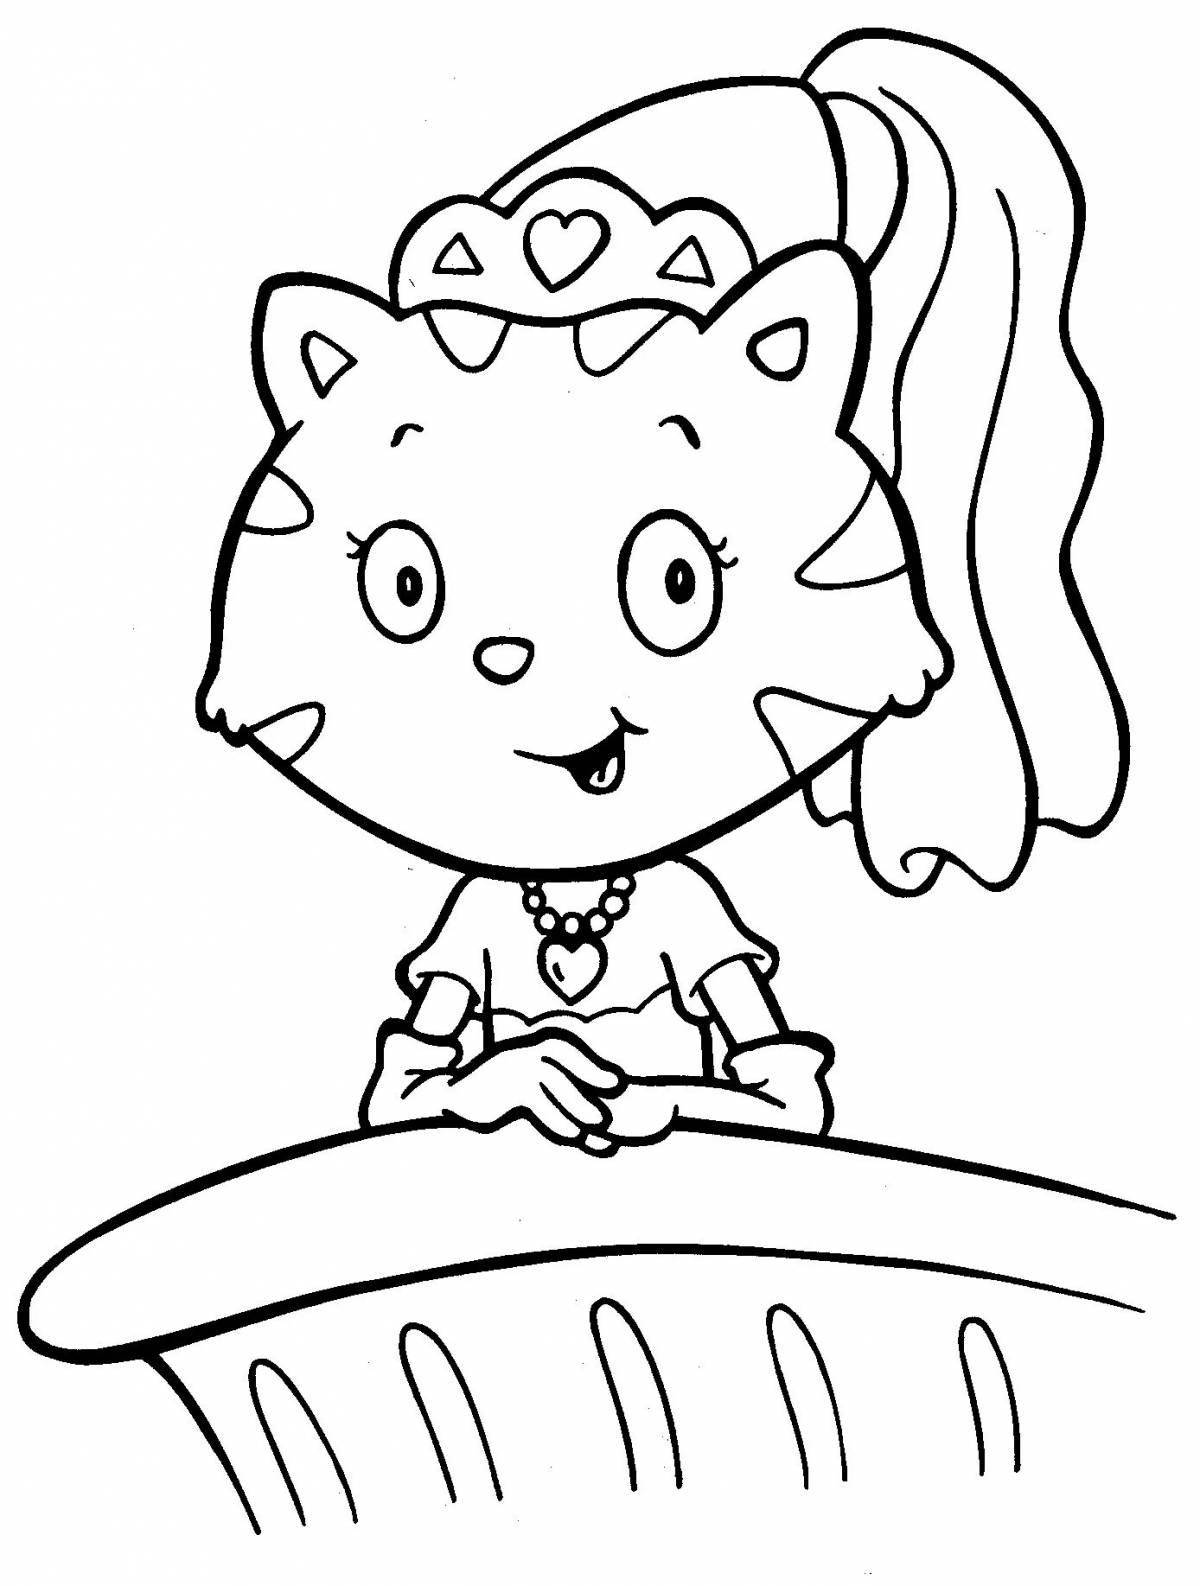 Coloring book cheerful red cat